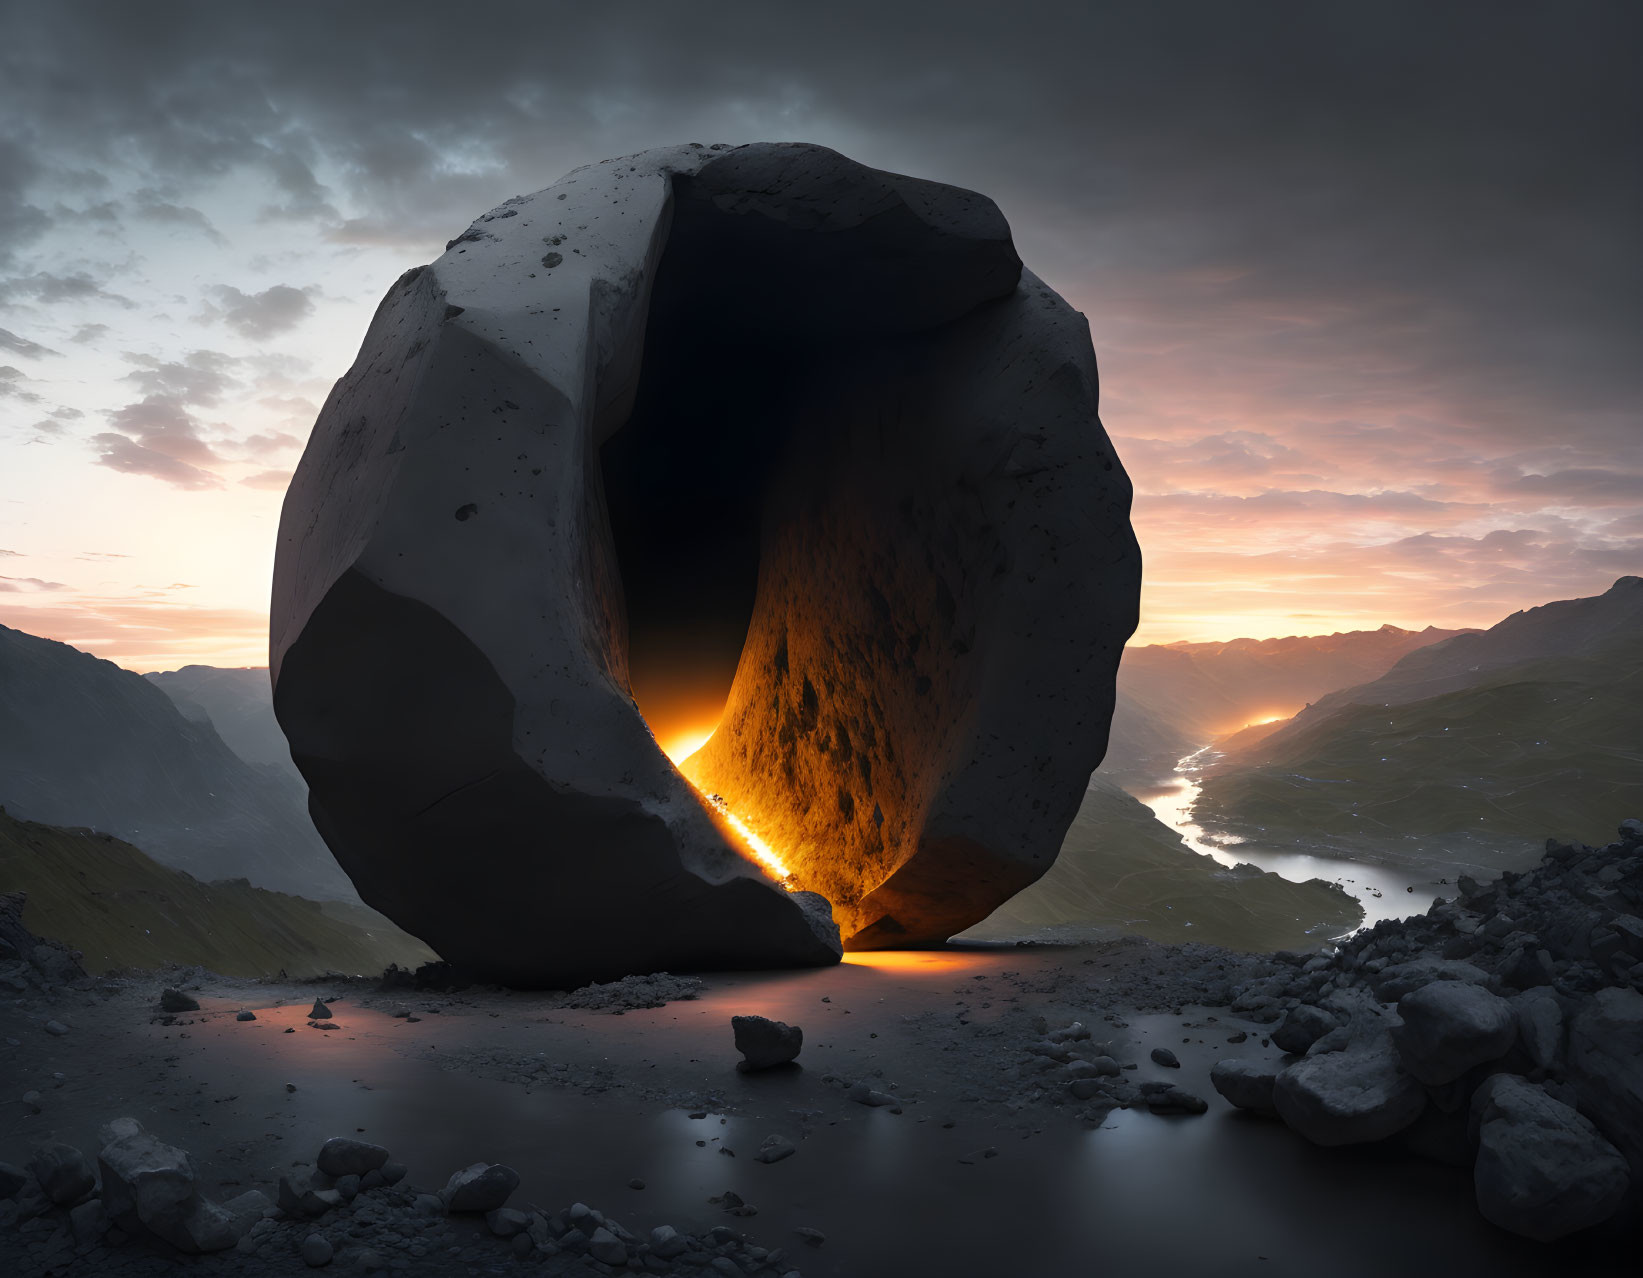 Glowing hollow rock in mountain landscape at sunset